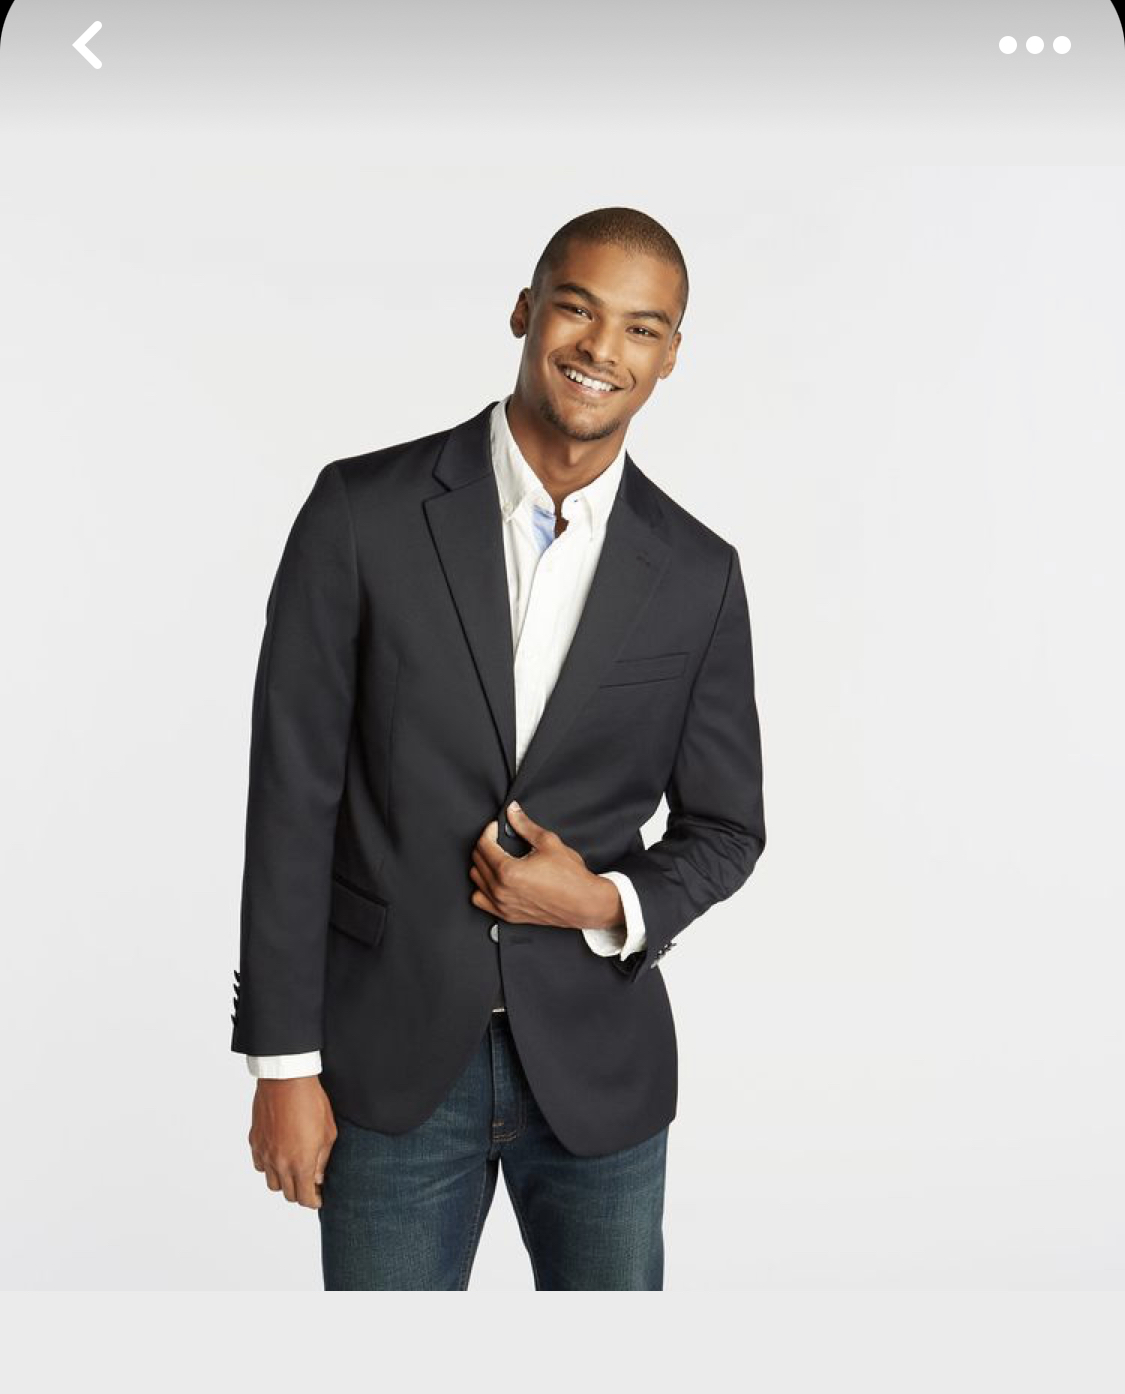 First Date Outfits For Men - Chosen By Elite Matchmakers